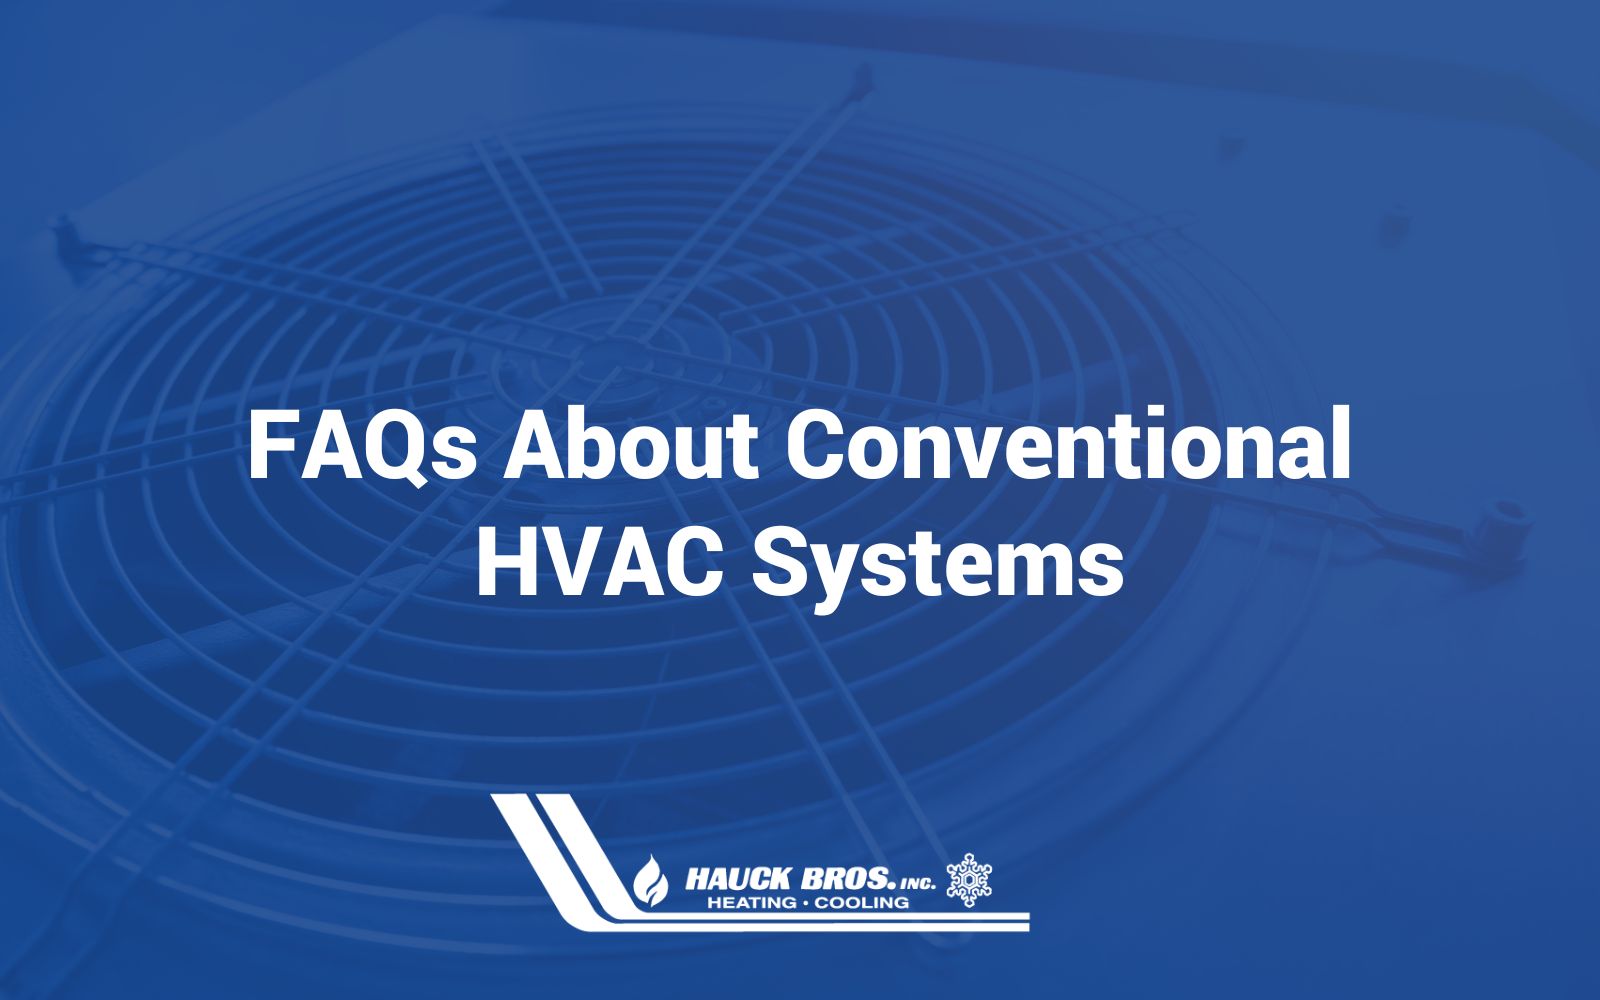 FAQs about conventional HVAC systems